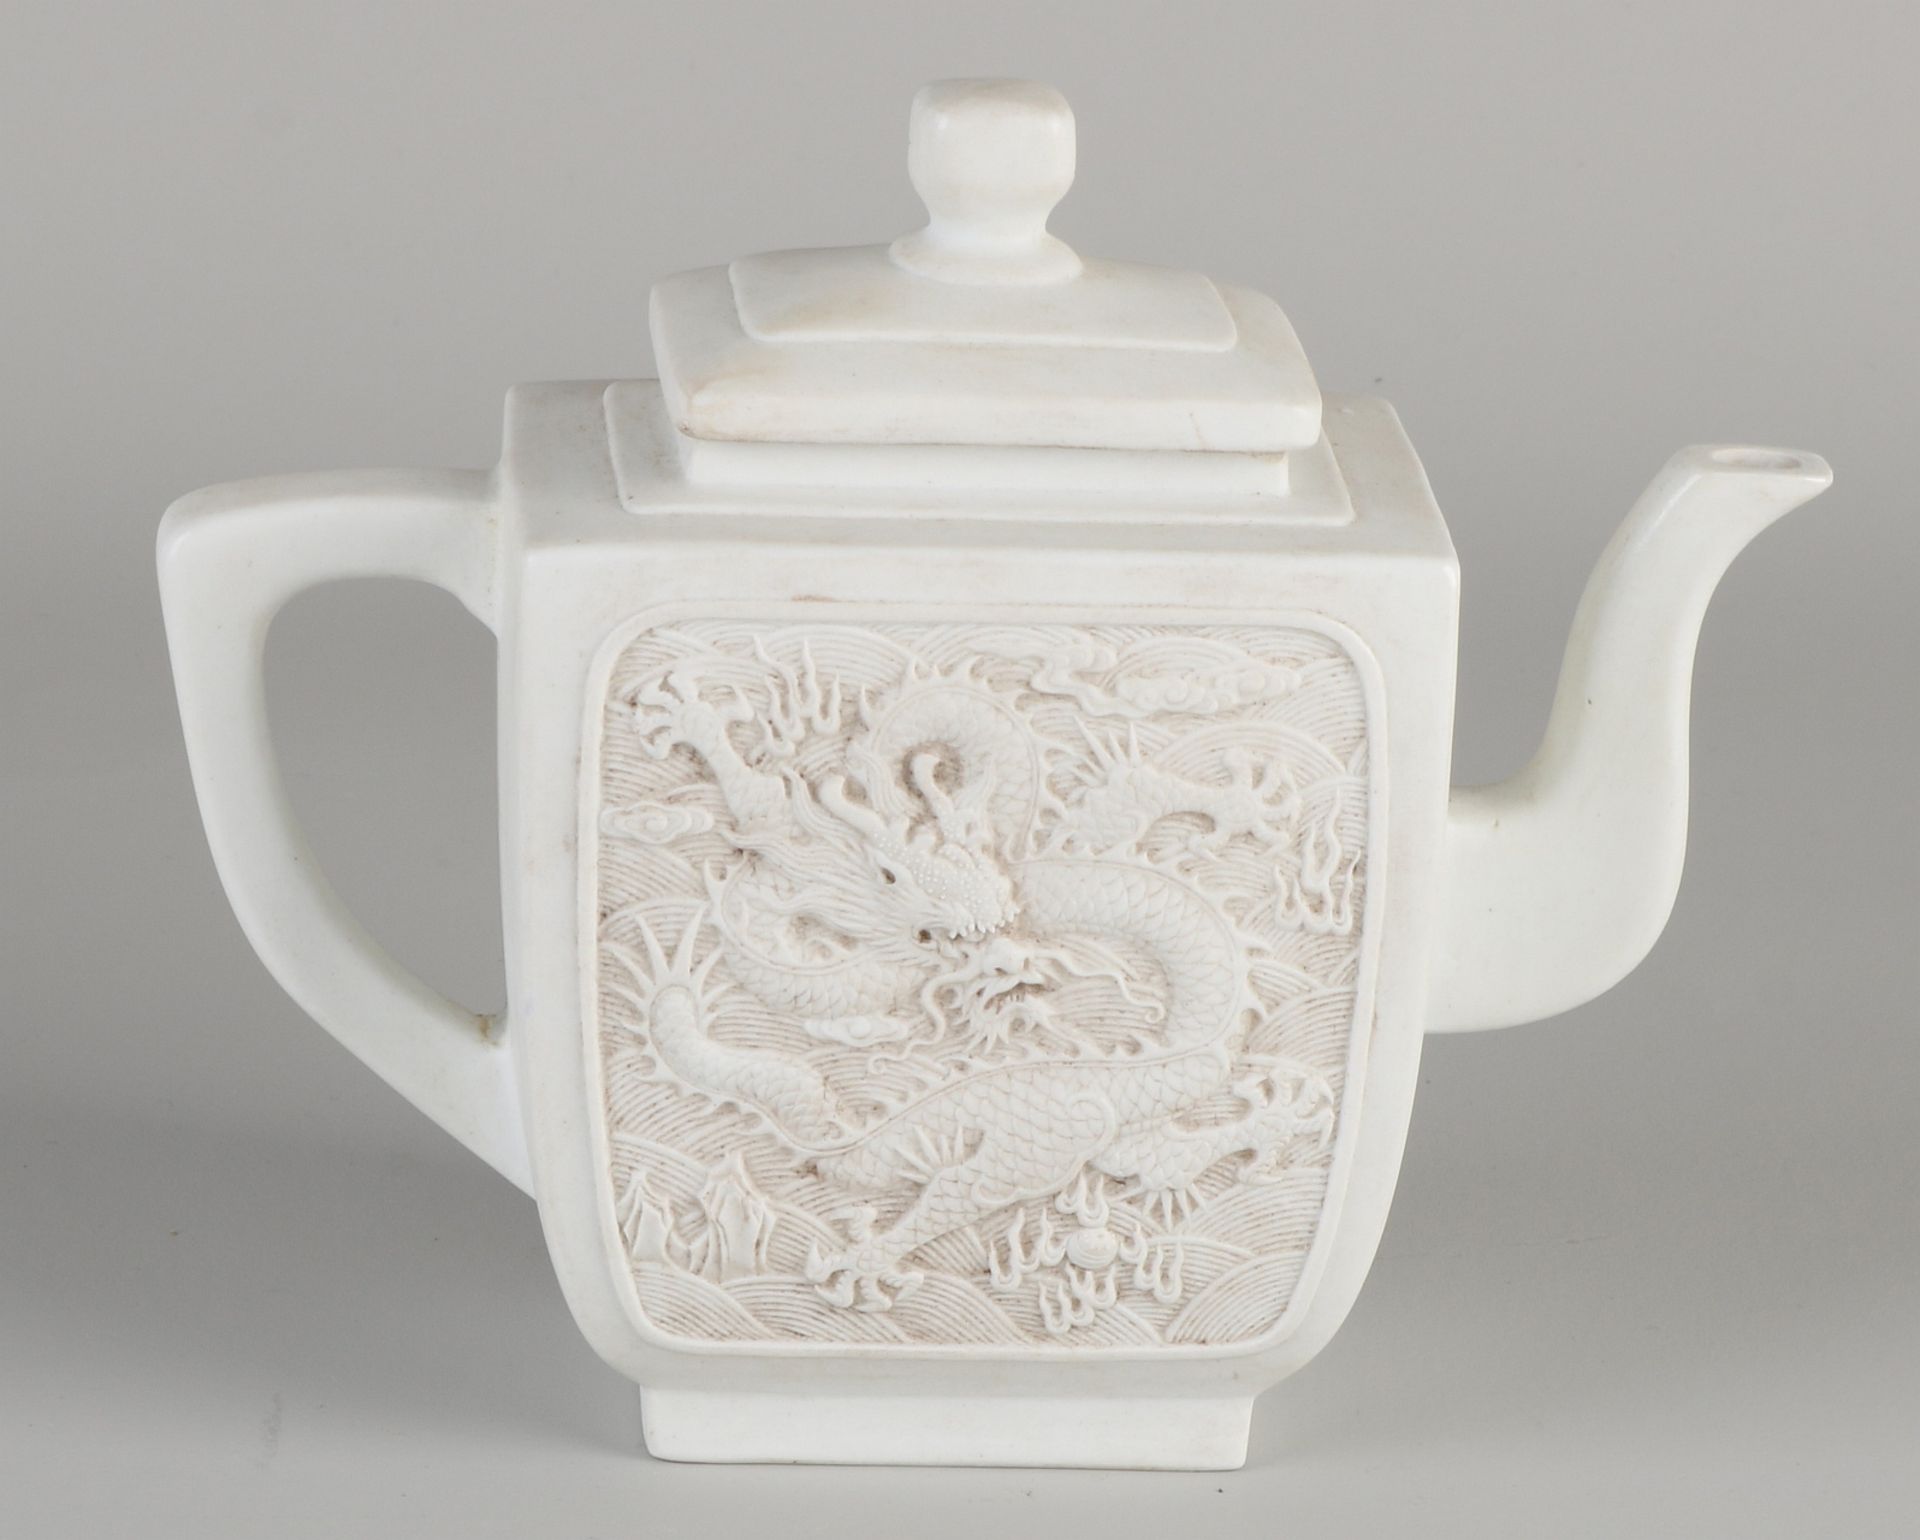 Chinese teapot with dragons